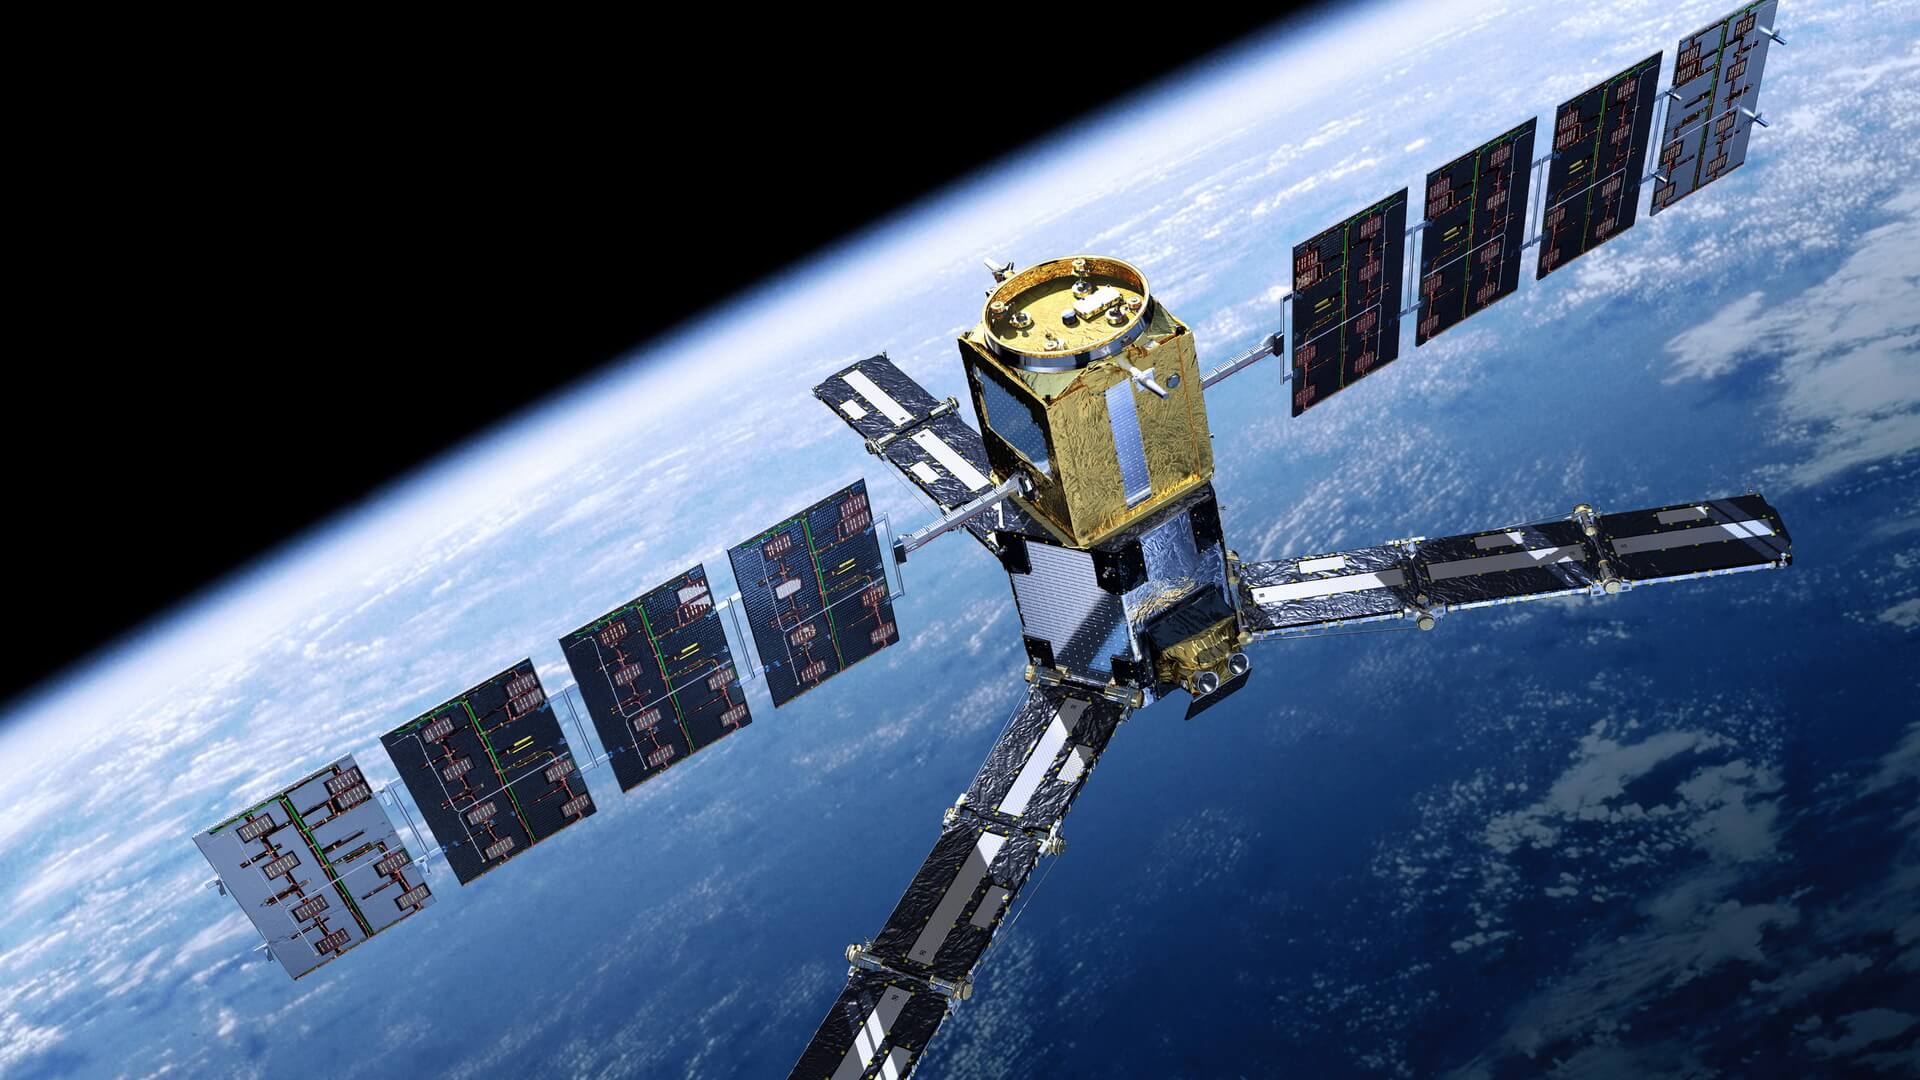 UK is looking to build its own version of GPS upon exit from European Union